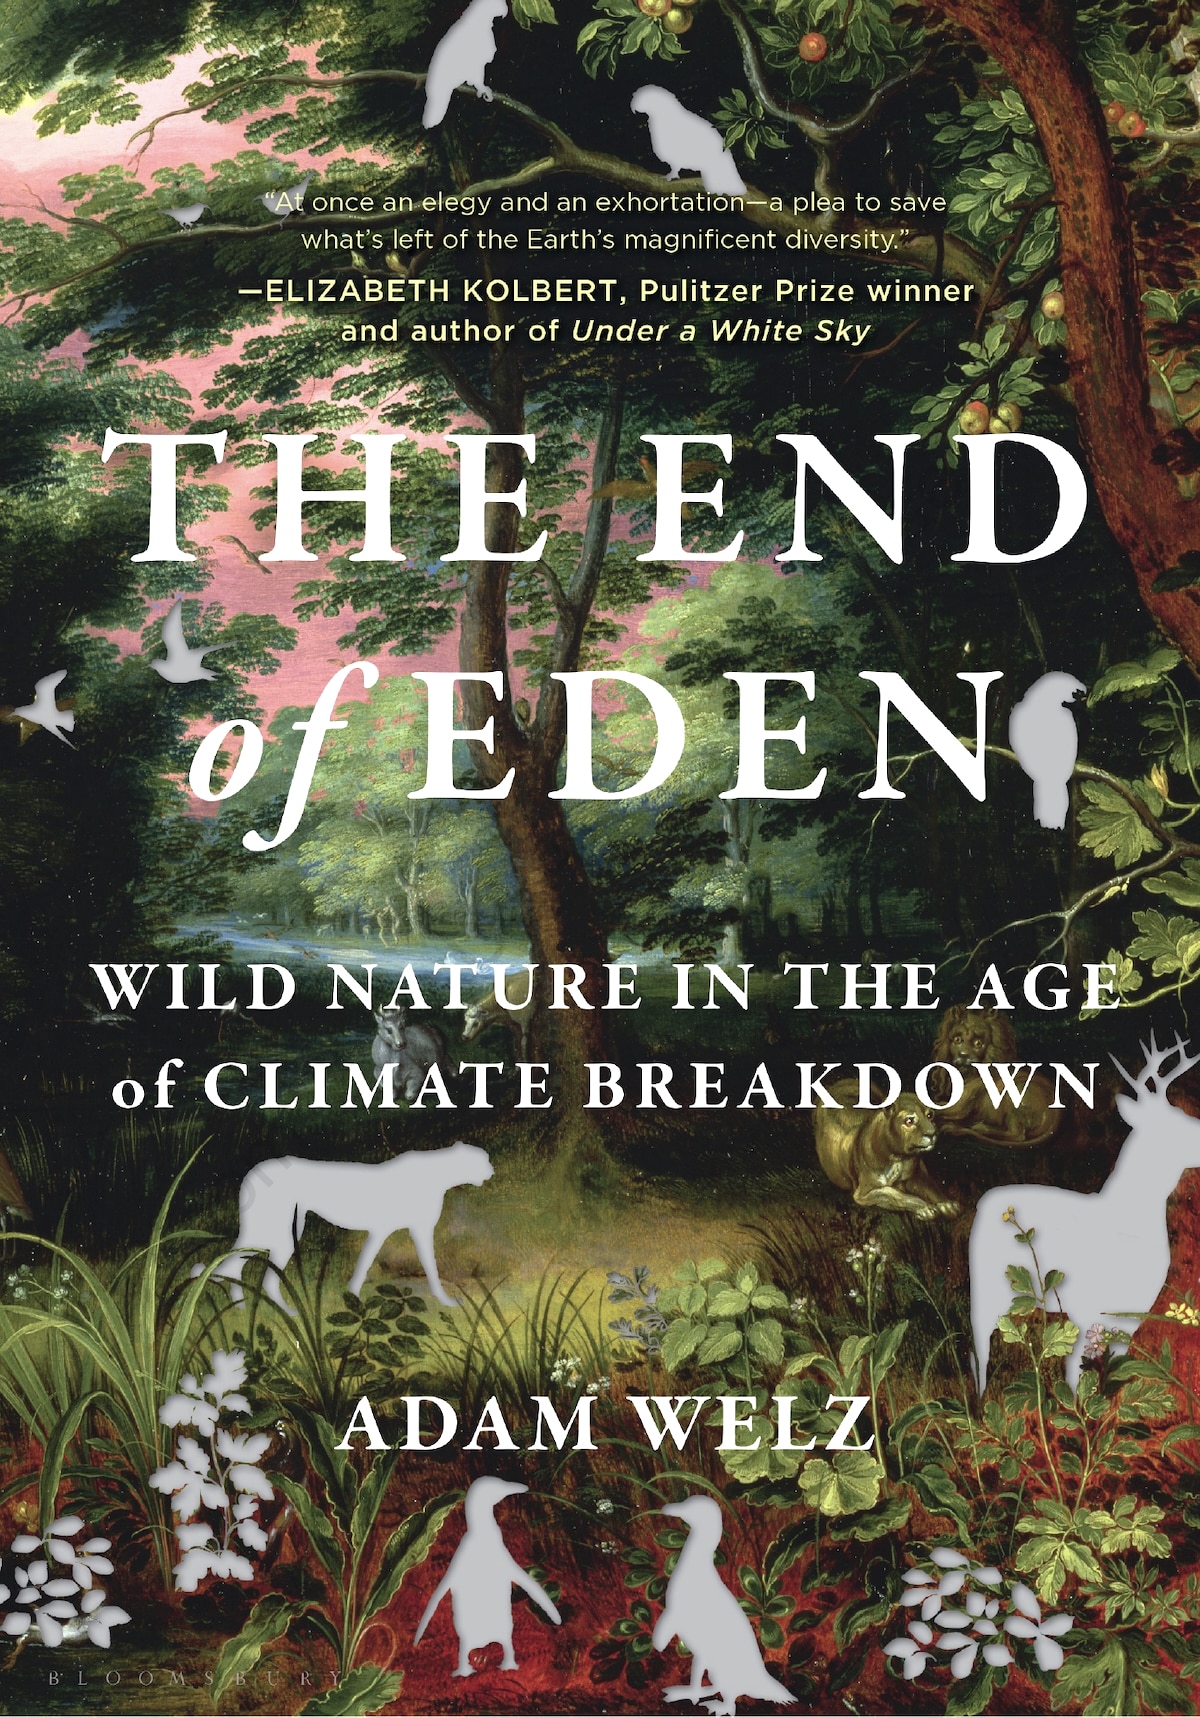 The book cover for The End of Eden by Adam Welz